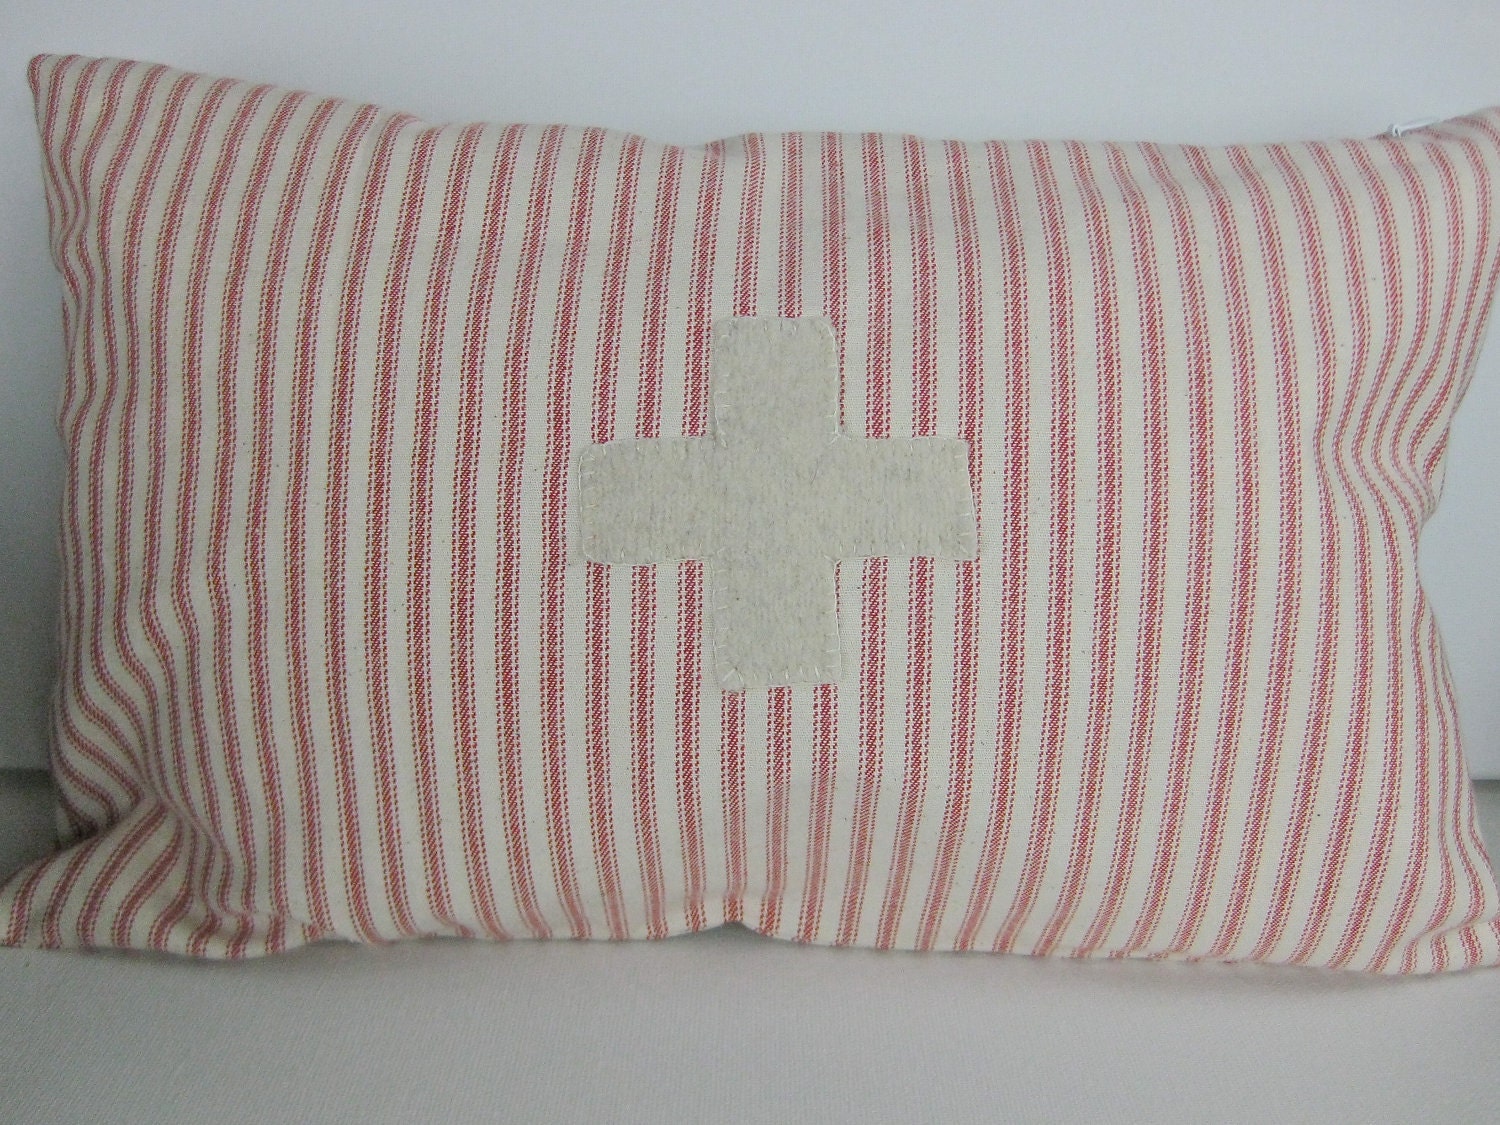 Beautiful Decorative Vintage Looking Swiss Cross Pillow - Cotton Red Ticking & Wool